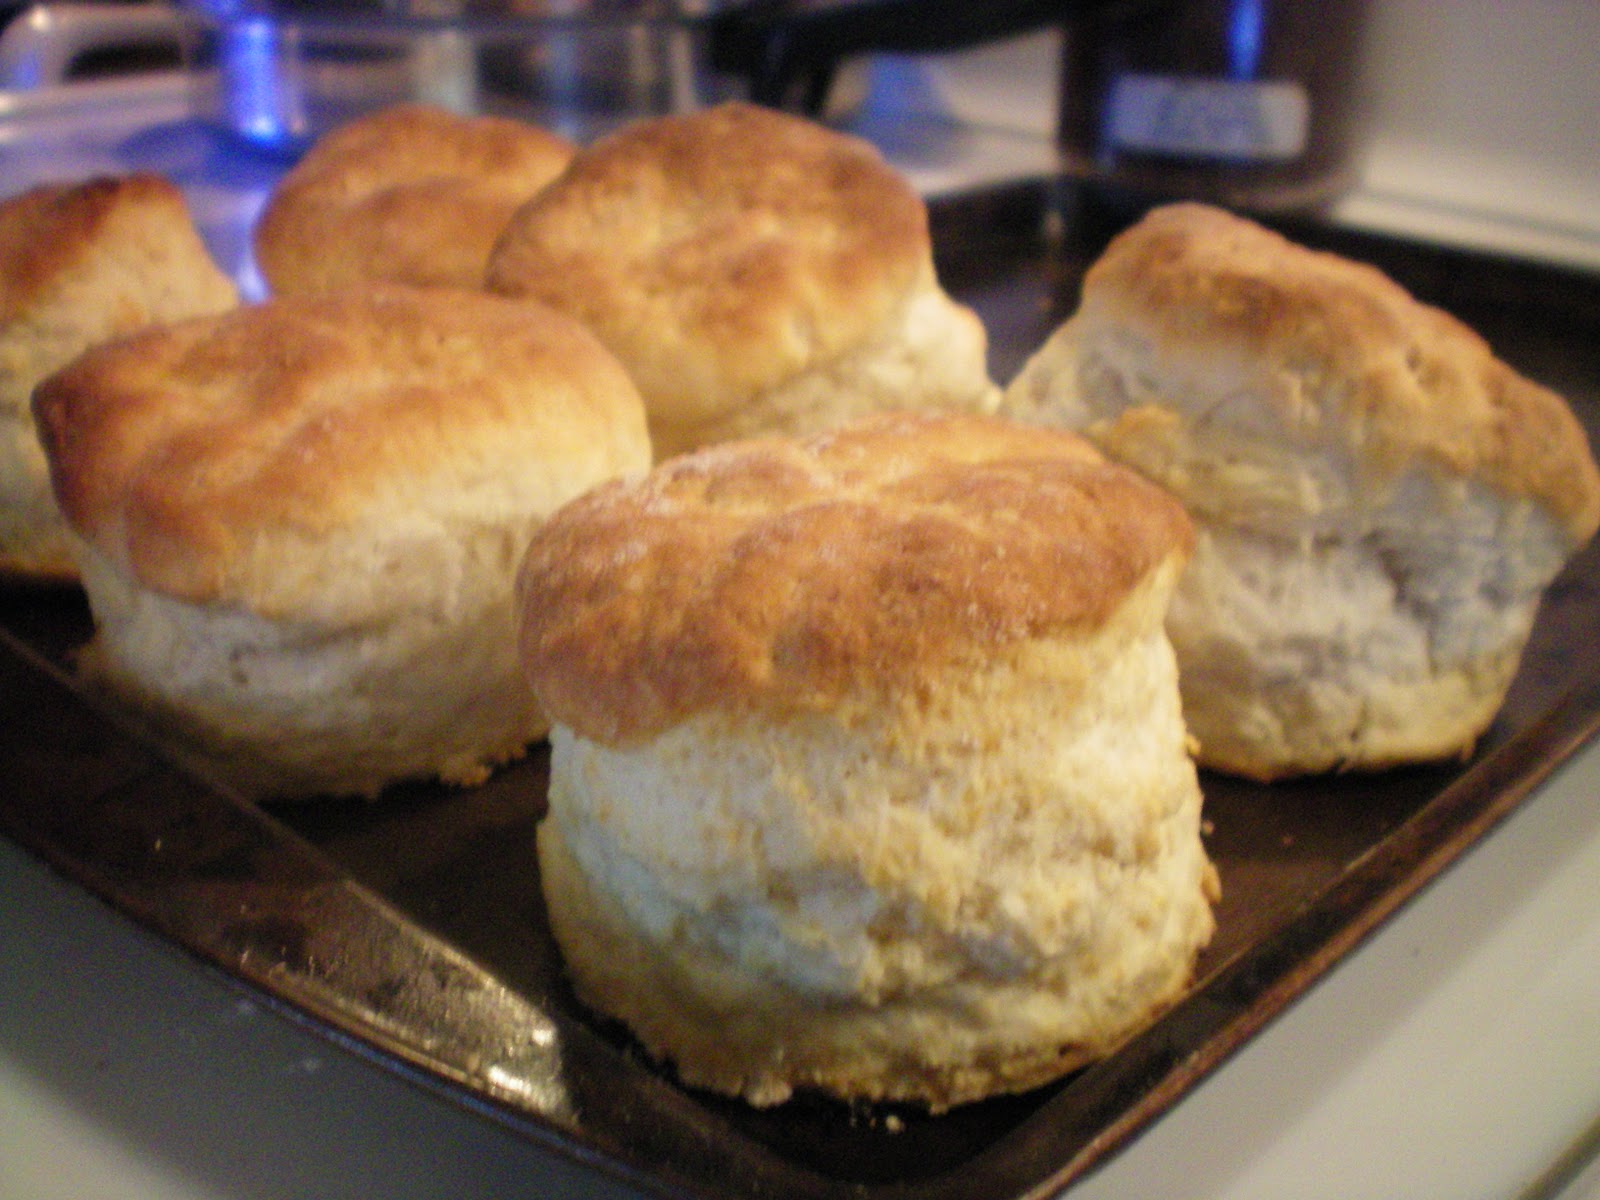 The new art of baking: Homemade biscuit
